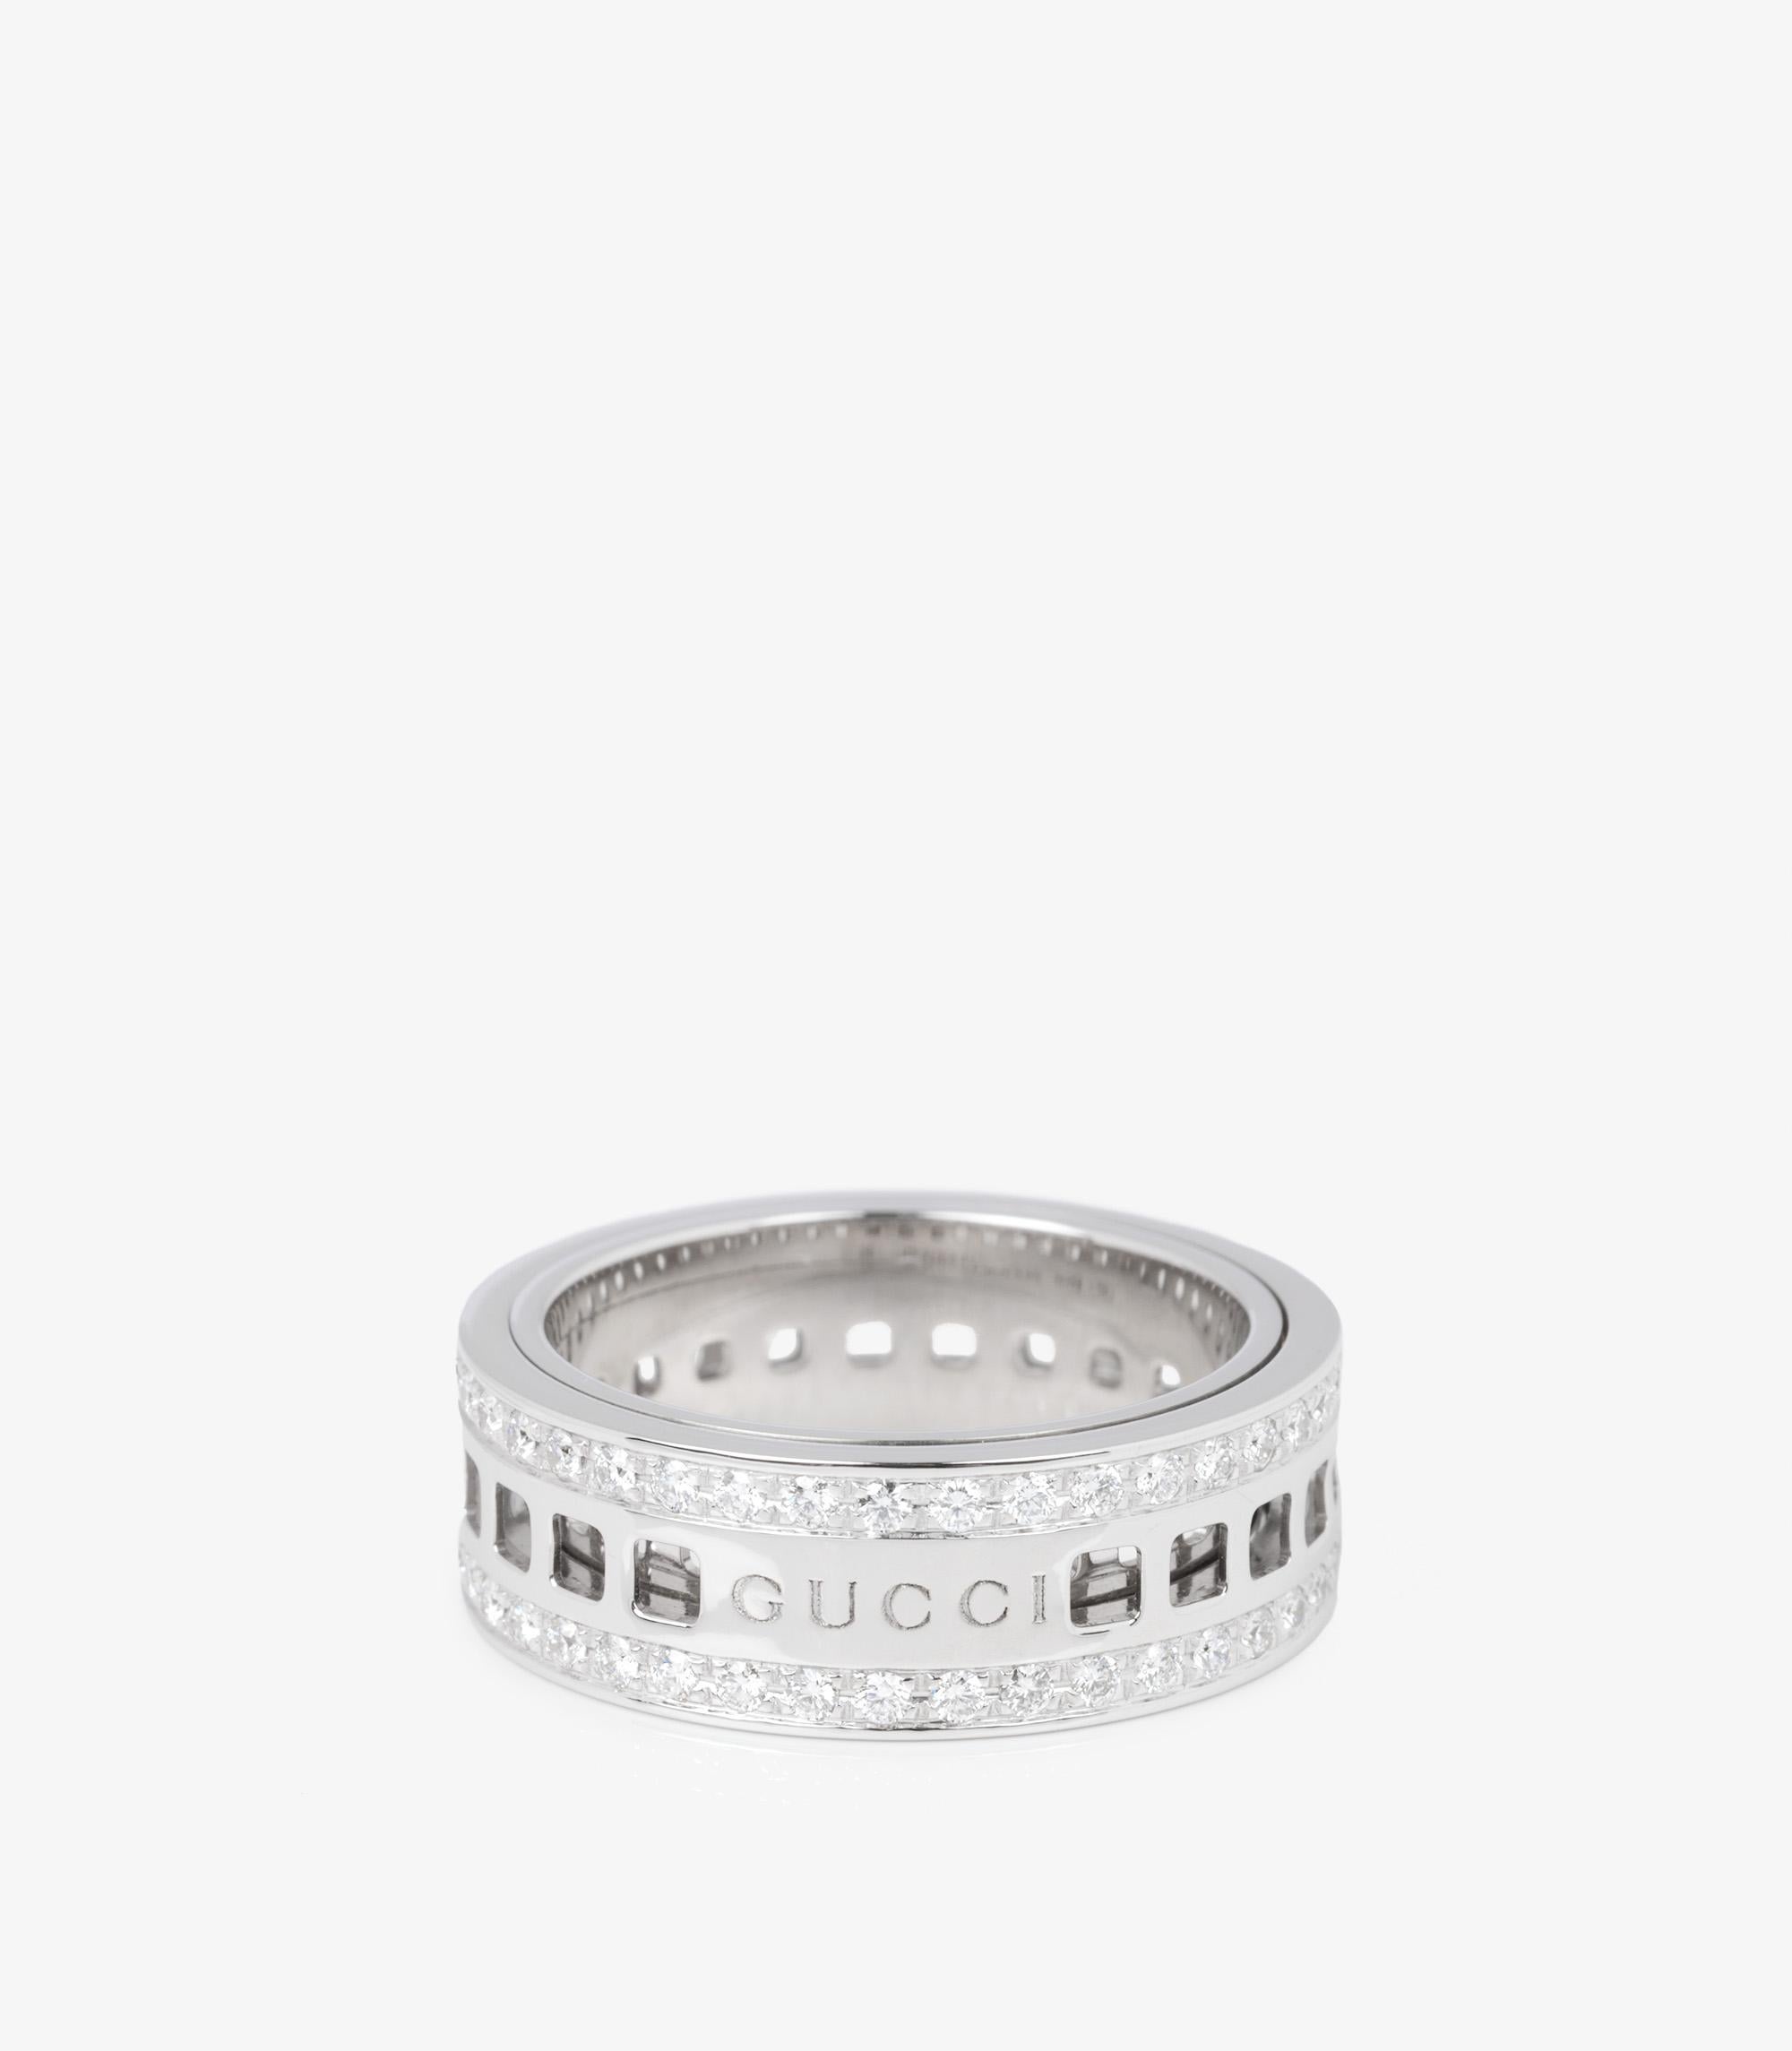 Gucci Diamond Set Spinner Ring

Brand- Gucci
Model- Spinner Ring
Product Type- Ring
Material(s)- 18ct White Gold
Gemstone- Diamond
UK Ring Size- O 3/4
EU Ring Size- 56
US Ring Size- 7 1/2
Resizing Possible- No

Gemstone Quantity- 78
Gemstone Cut-